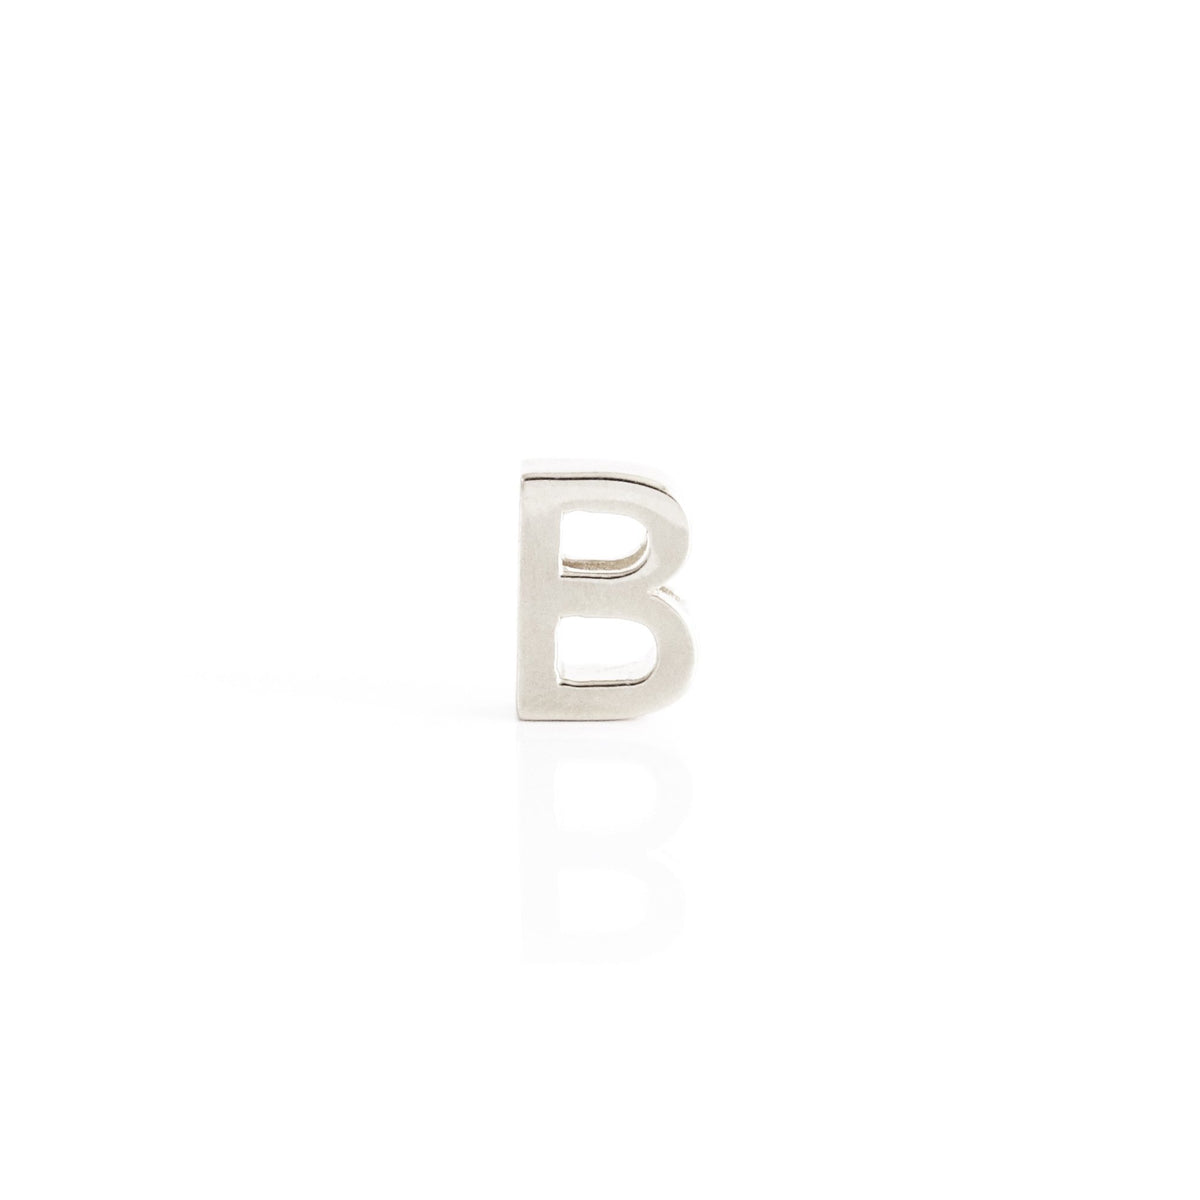 CHARMED INITIAL - B - GOLD OR SILVER - SO PRETTY CARA COTTER